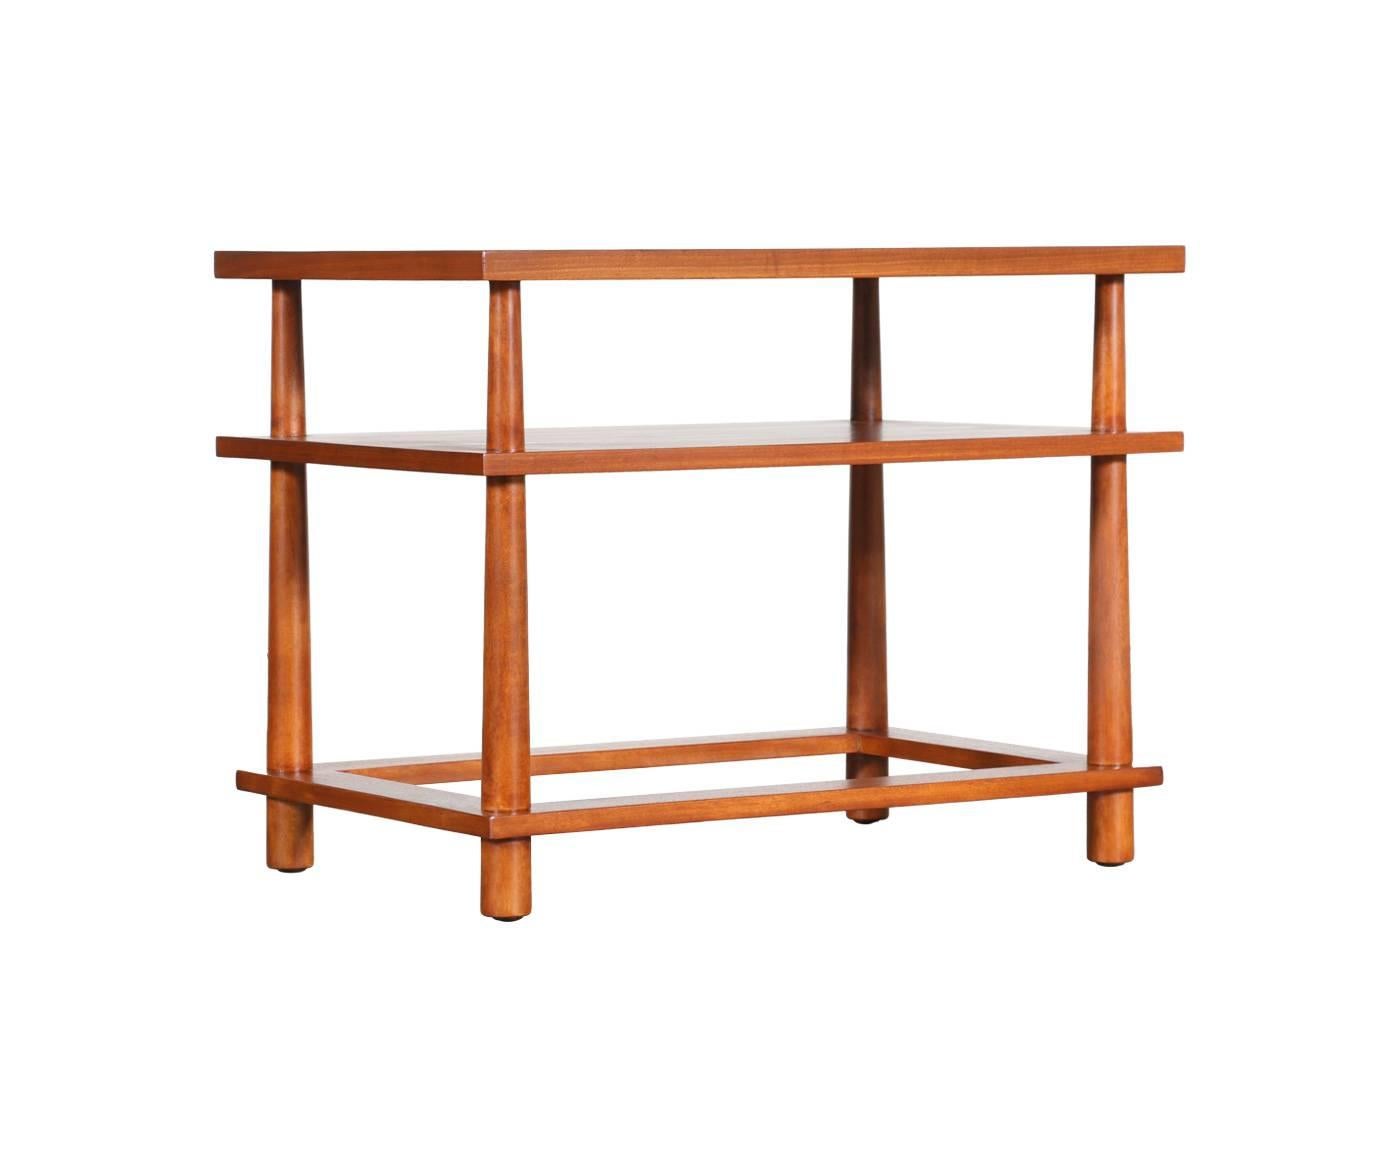 Designer: T.H. Robsjohn-Gibbings.
Manufacturer: John Widdicomb.
Period/Style: Mid-Century Modern
Country: United States.
Date: 1950s.

Dimensions: 23″ H x 30″ W x 20″ D.
Materials: Walnut.
Condition: Excellent, newly refinished.
Number of